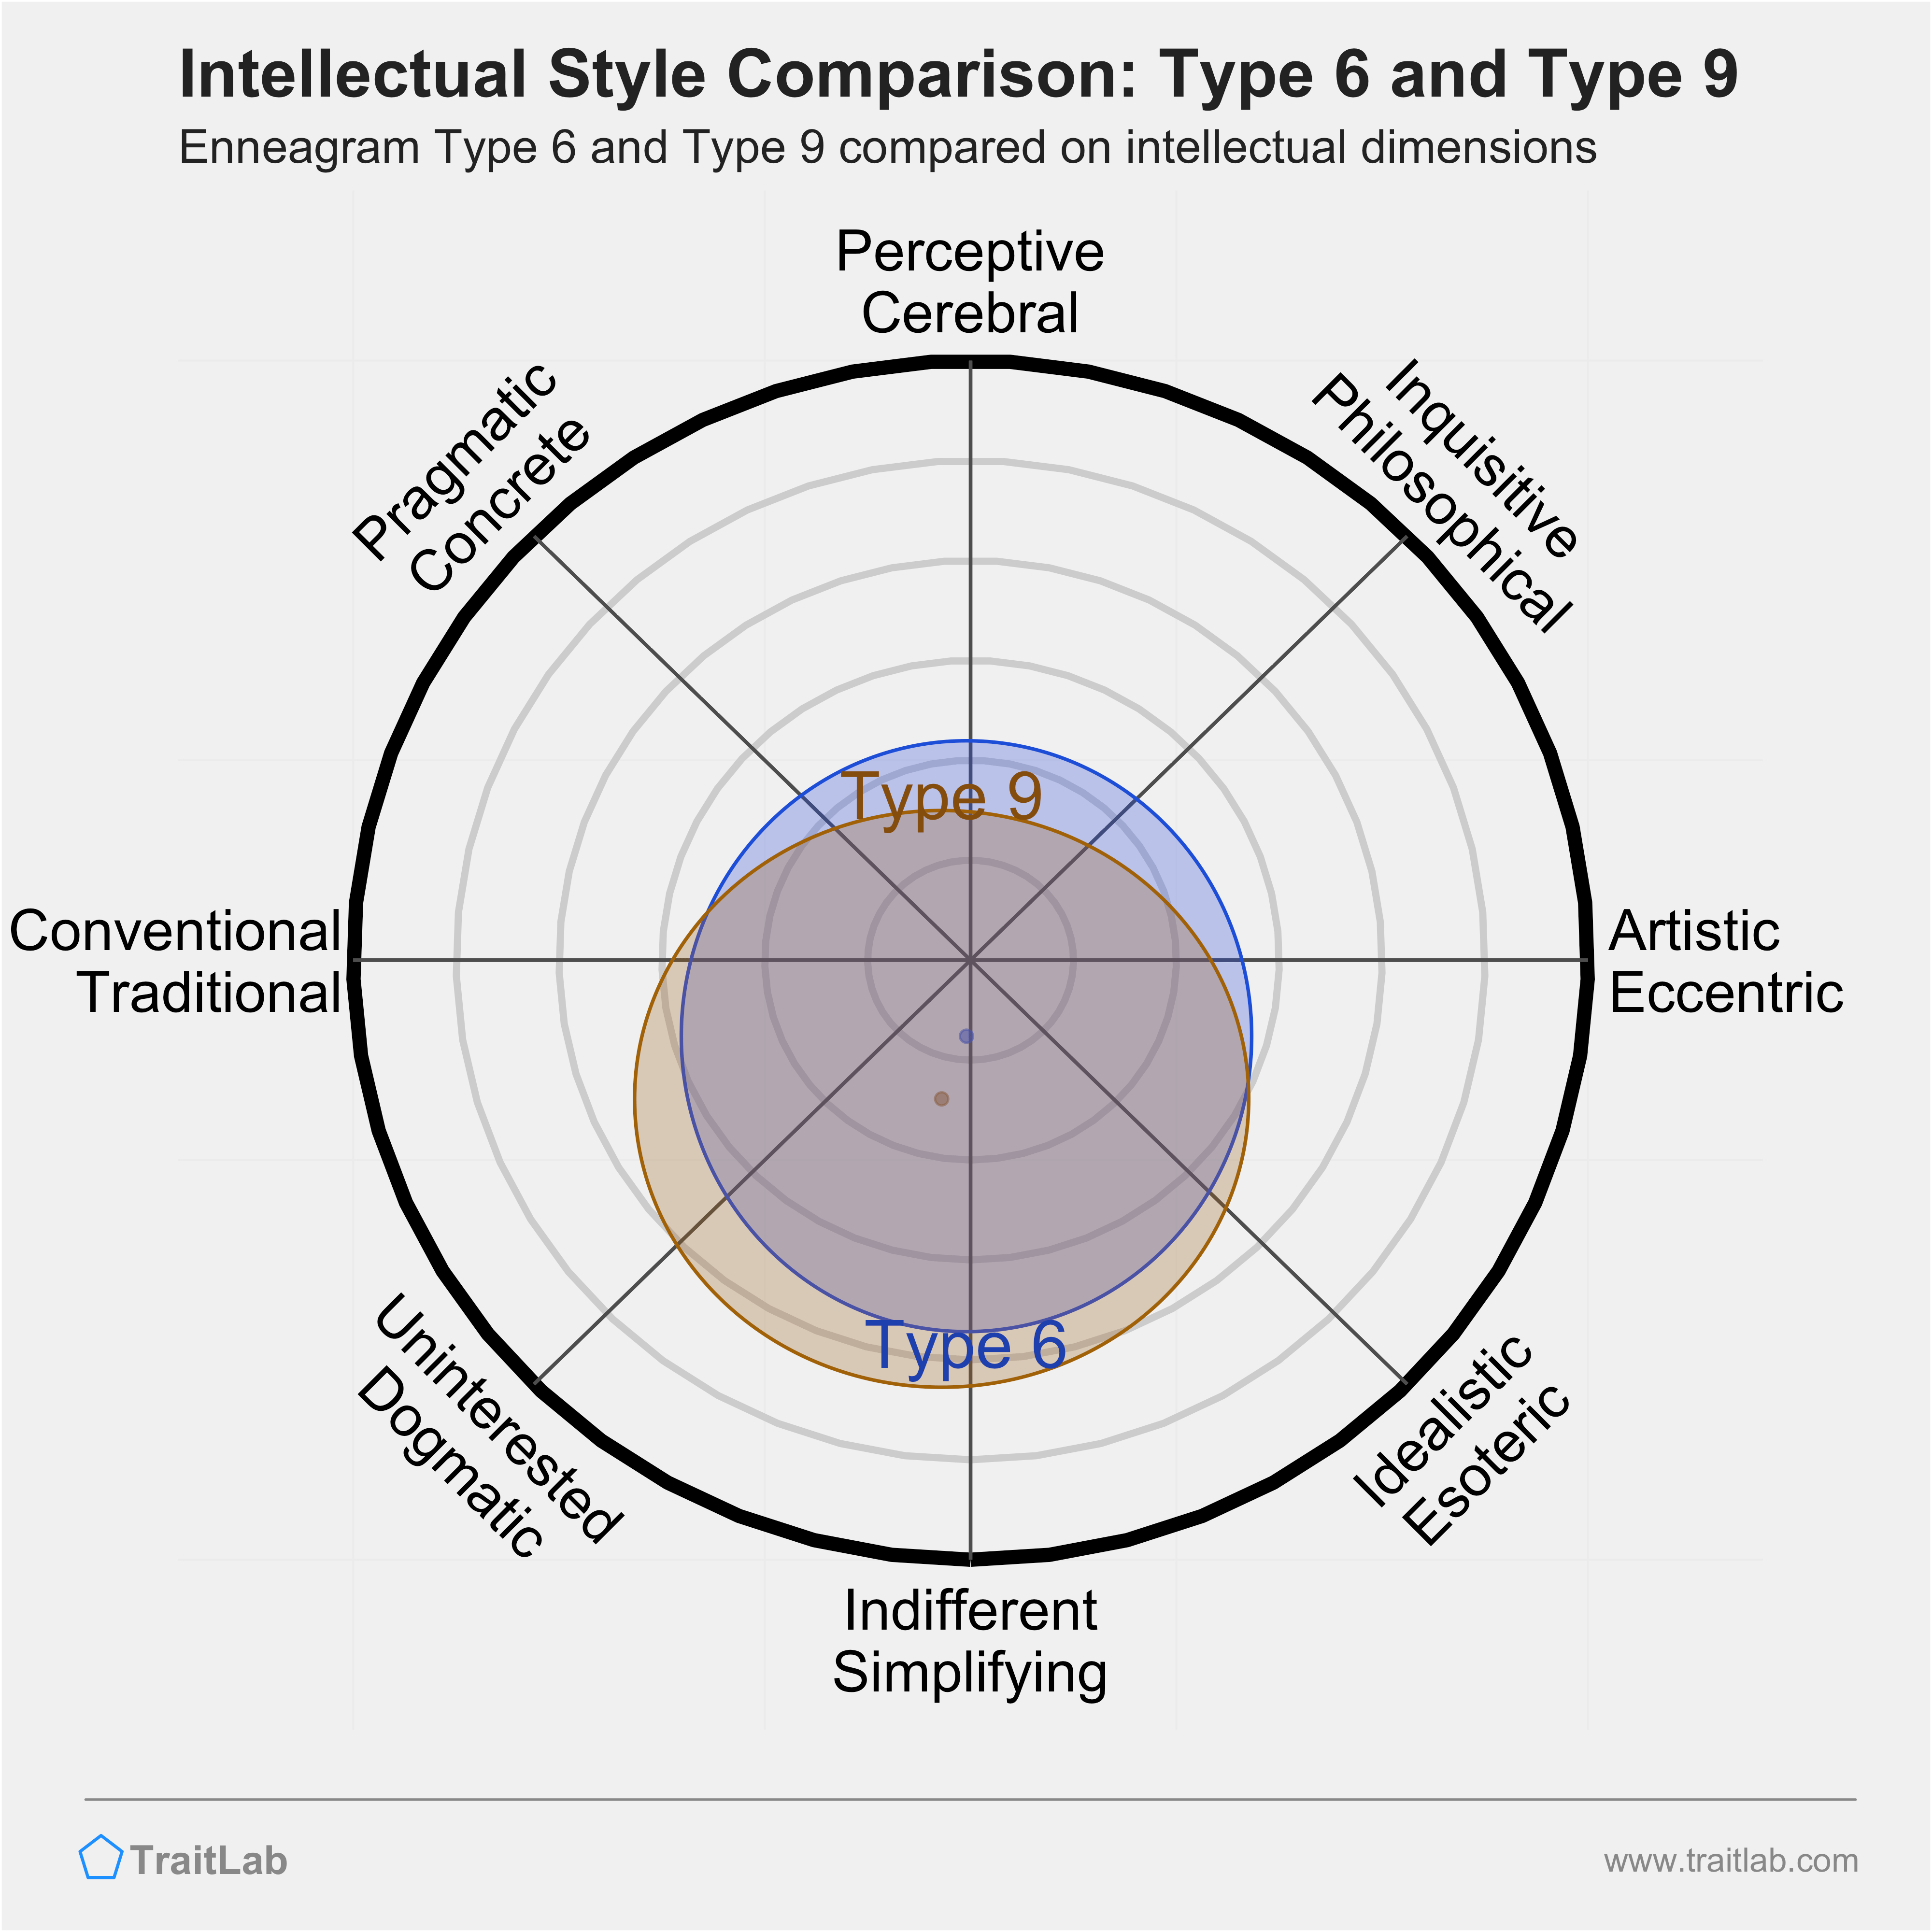 Type 6 and Type 9 comparison across intellectual dimensions